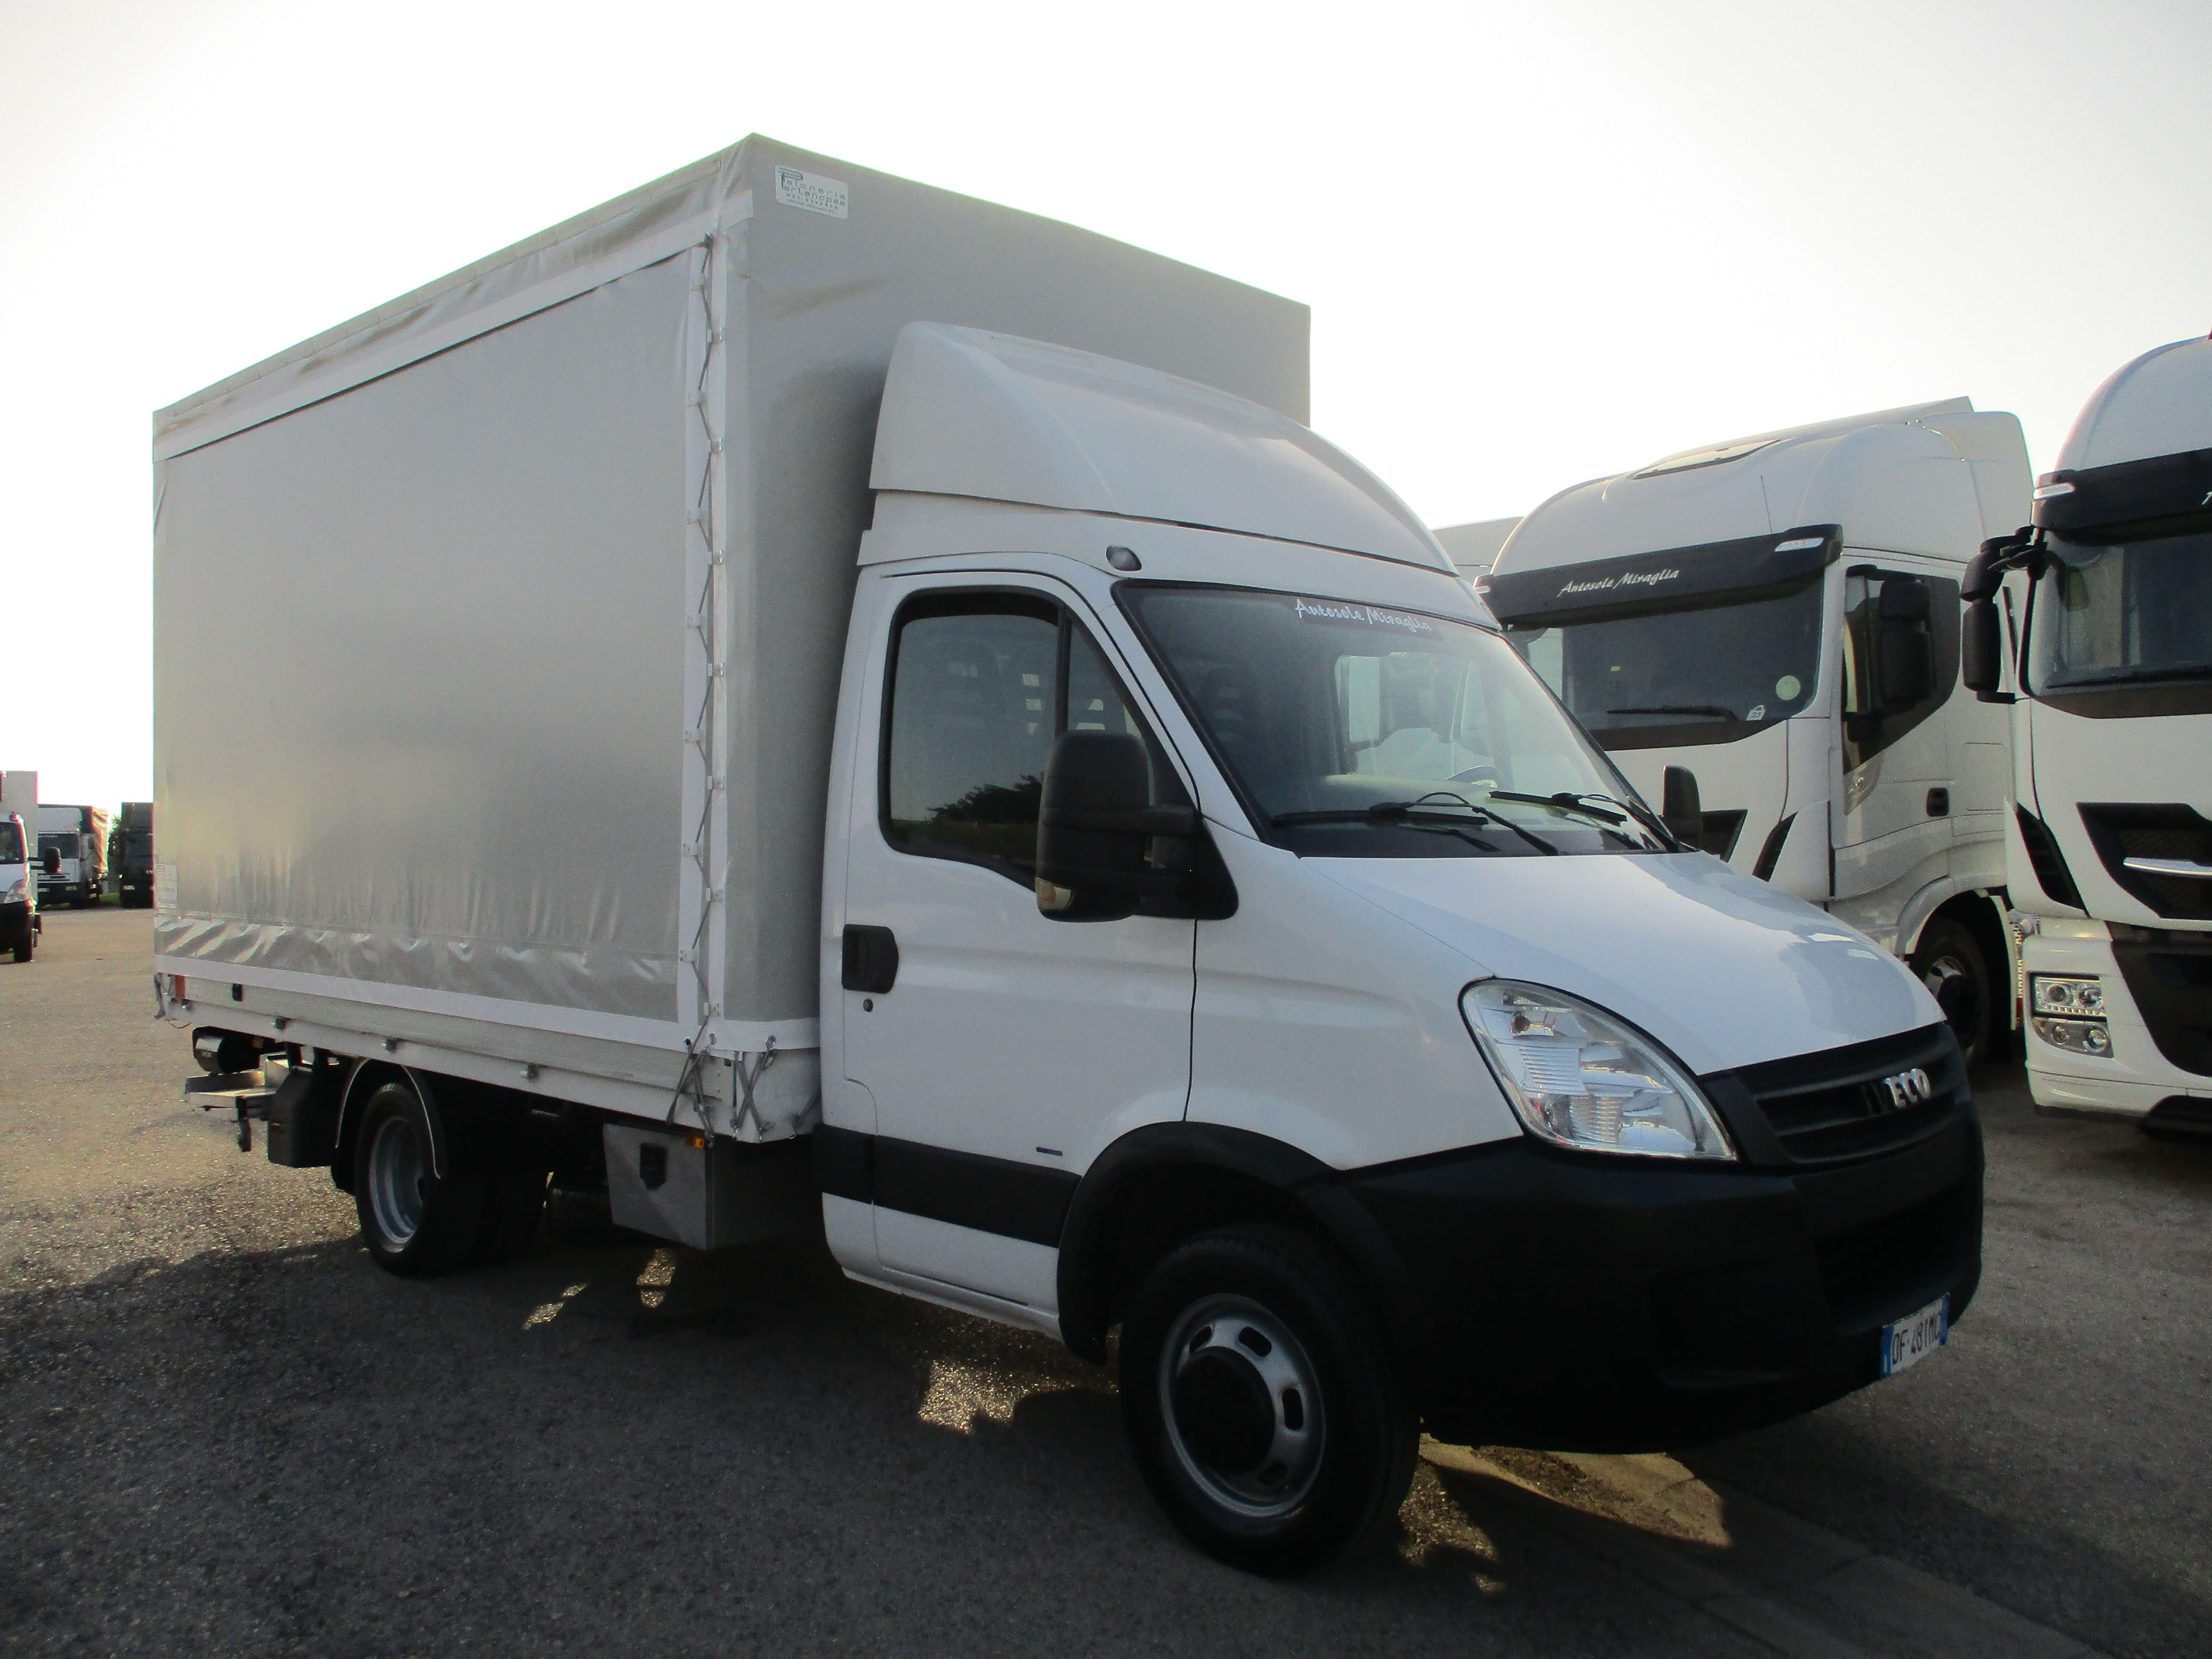 Iveco Daily Other in White used in Giugliano in Campania for € 14,800.-